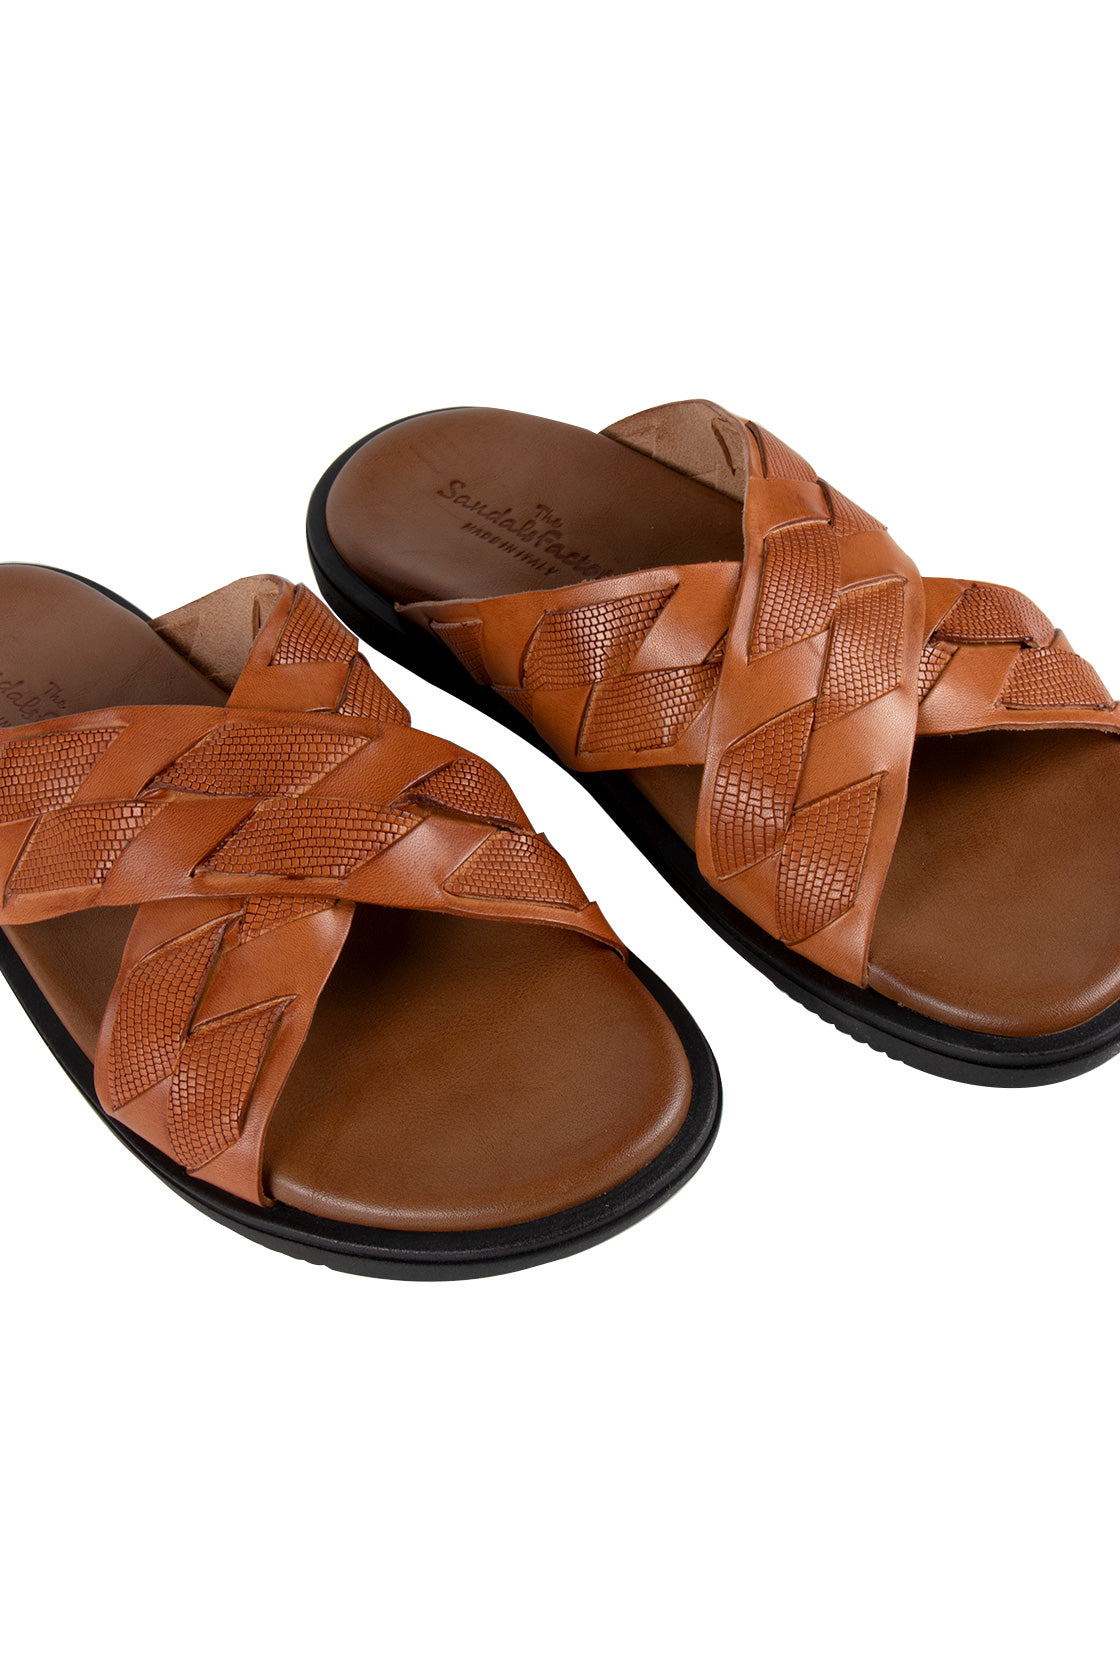 The Sandal Factory Leather Sandals Cappuccino